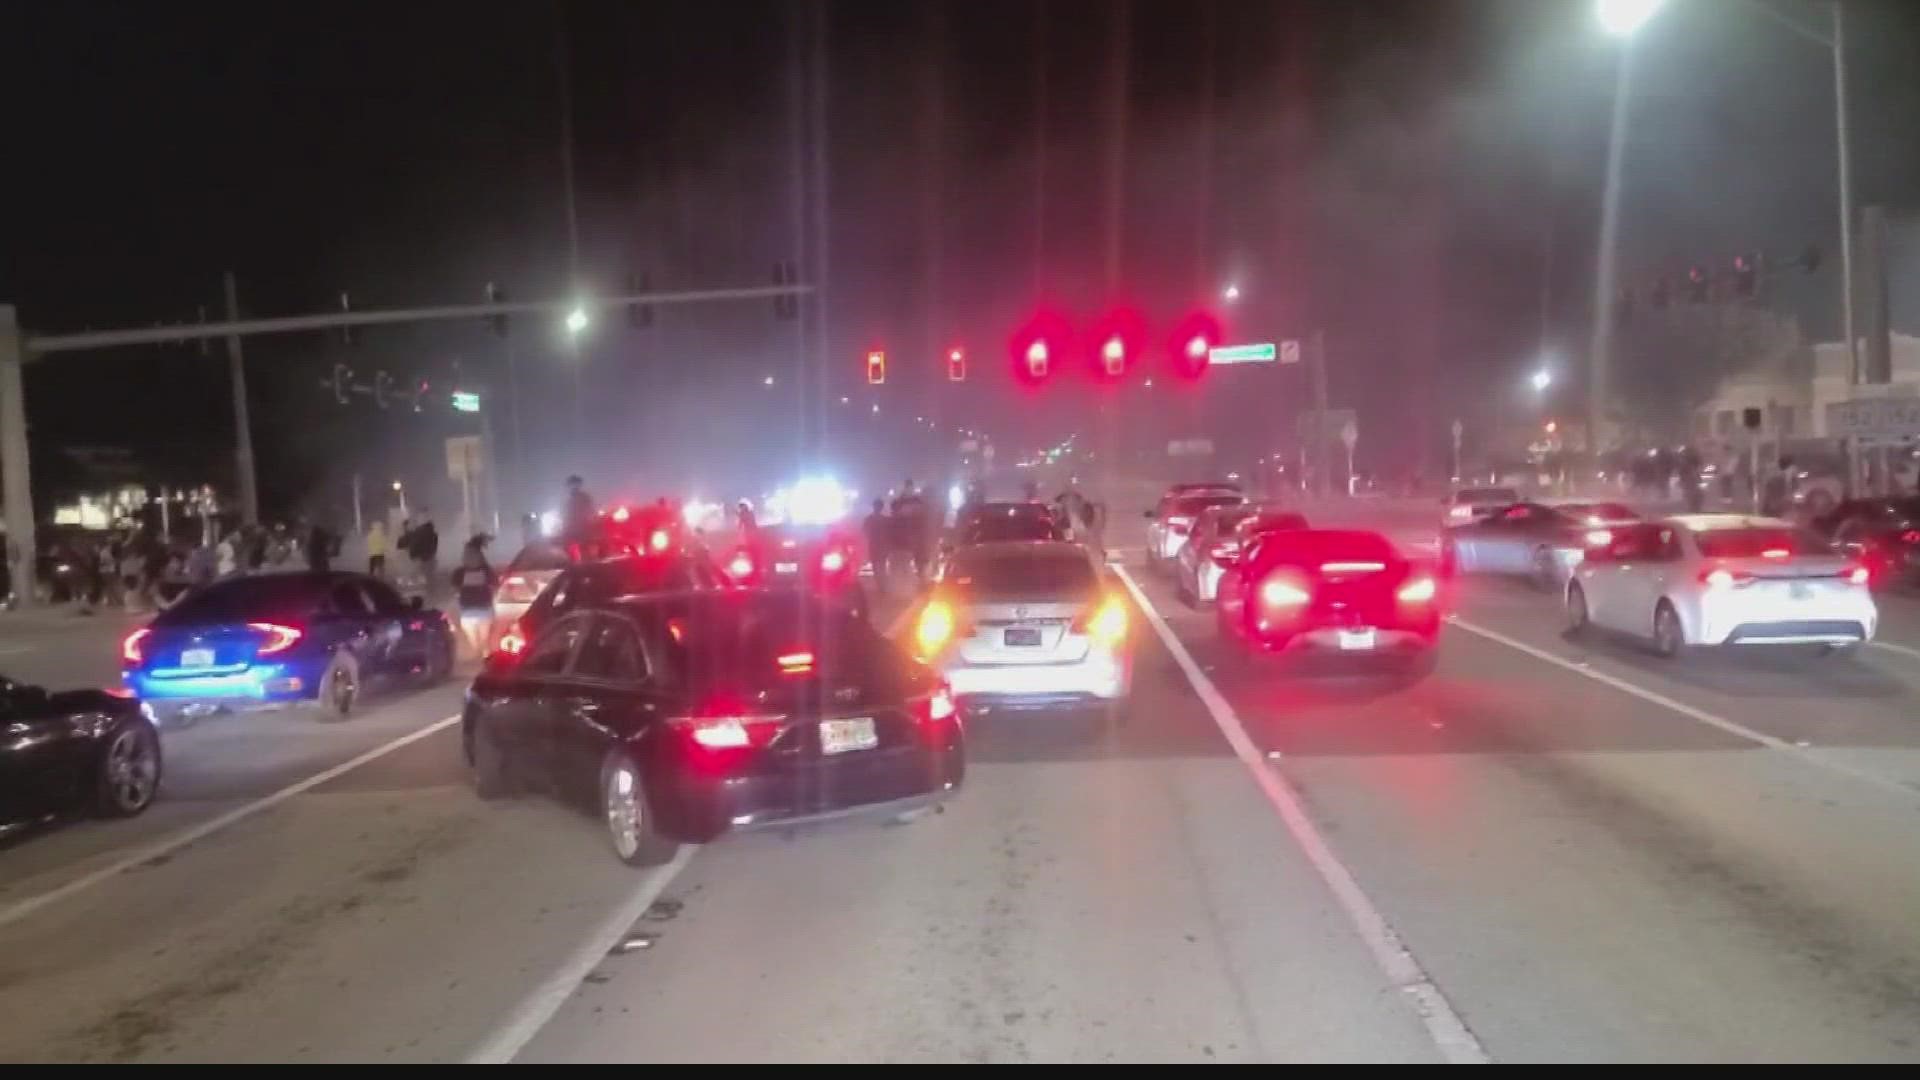 Cars were at a standstill at a Jacksonville intersection while street racers did burnouts.